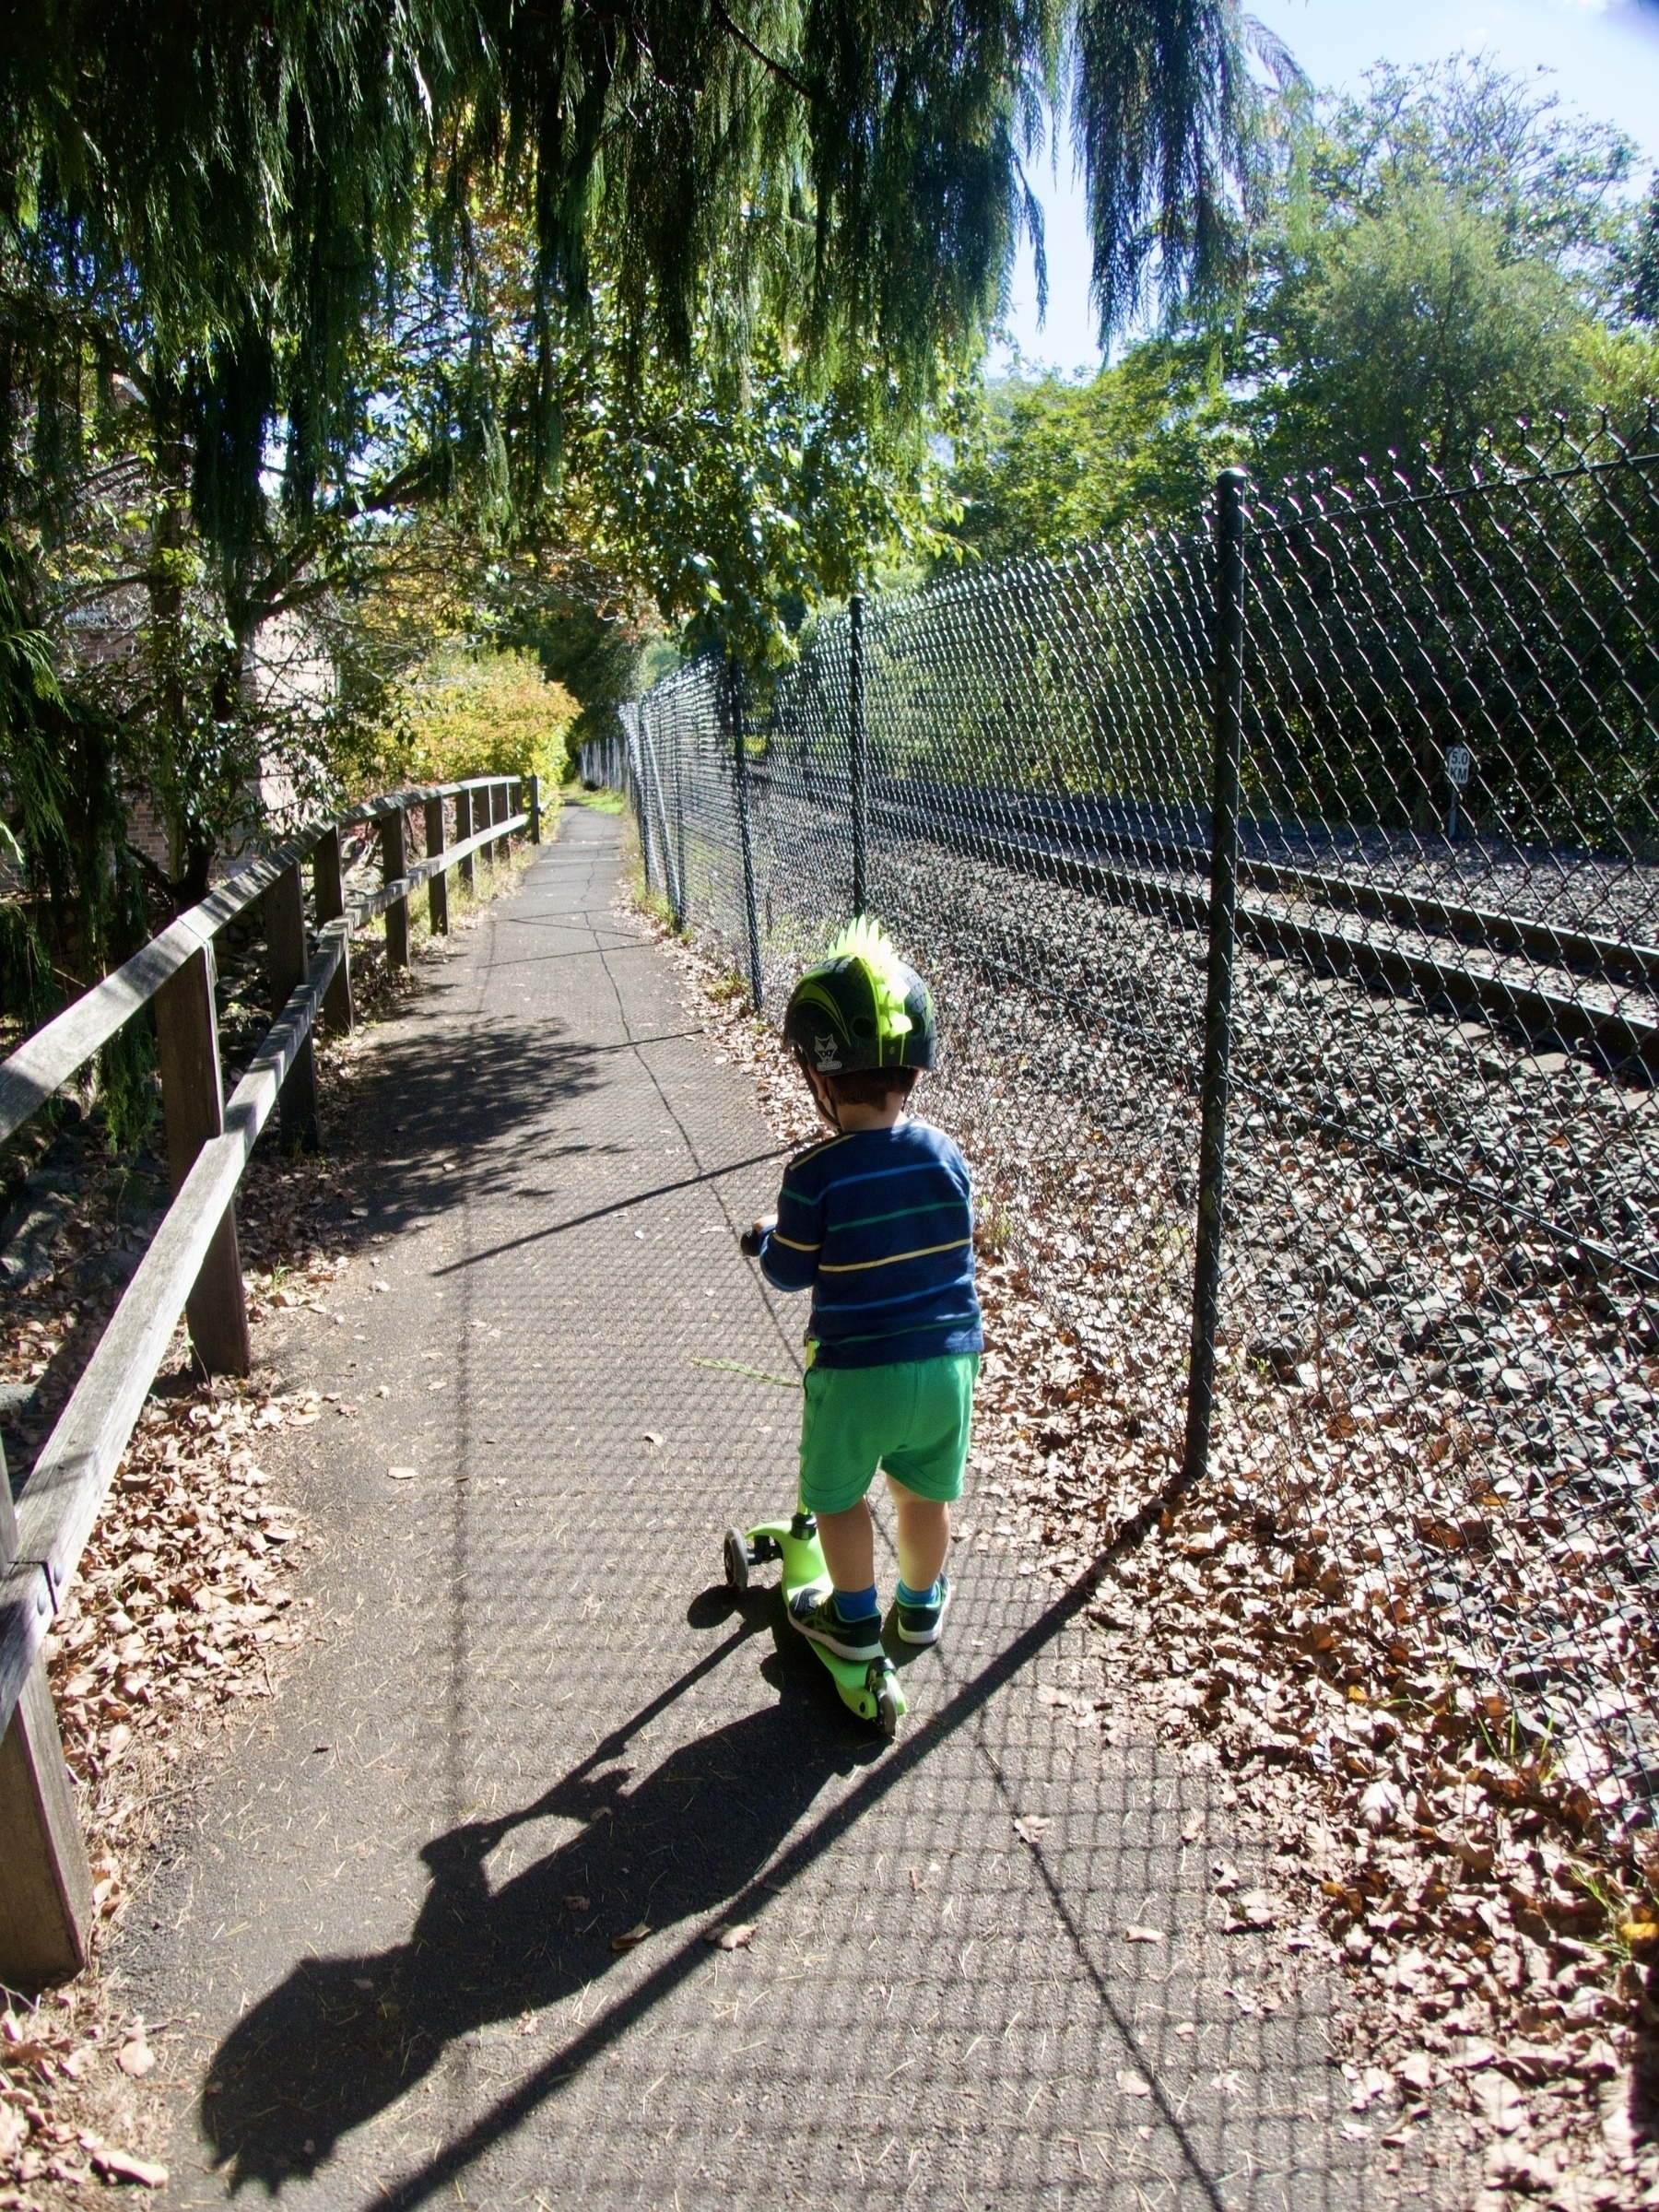 A kid seen from behind, riding a scooter while wearing a spiky green helmet, next to a railway with overhanging tree branches